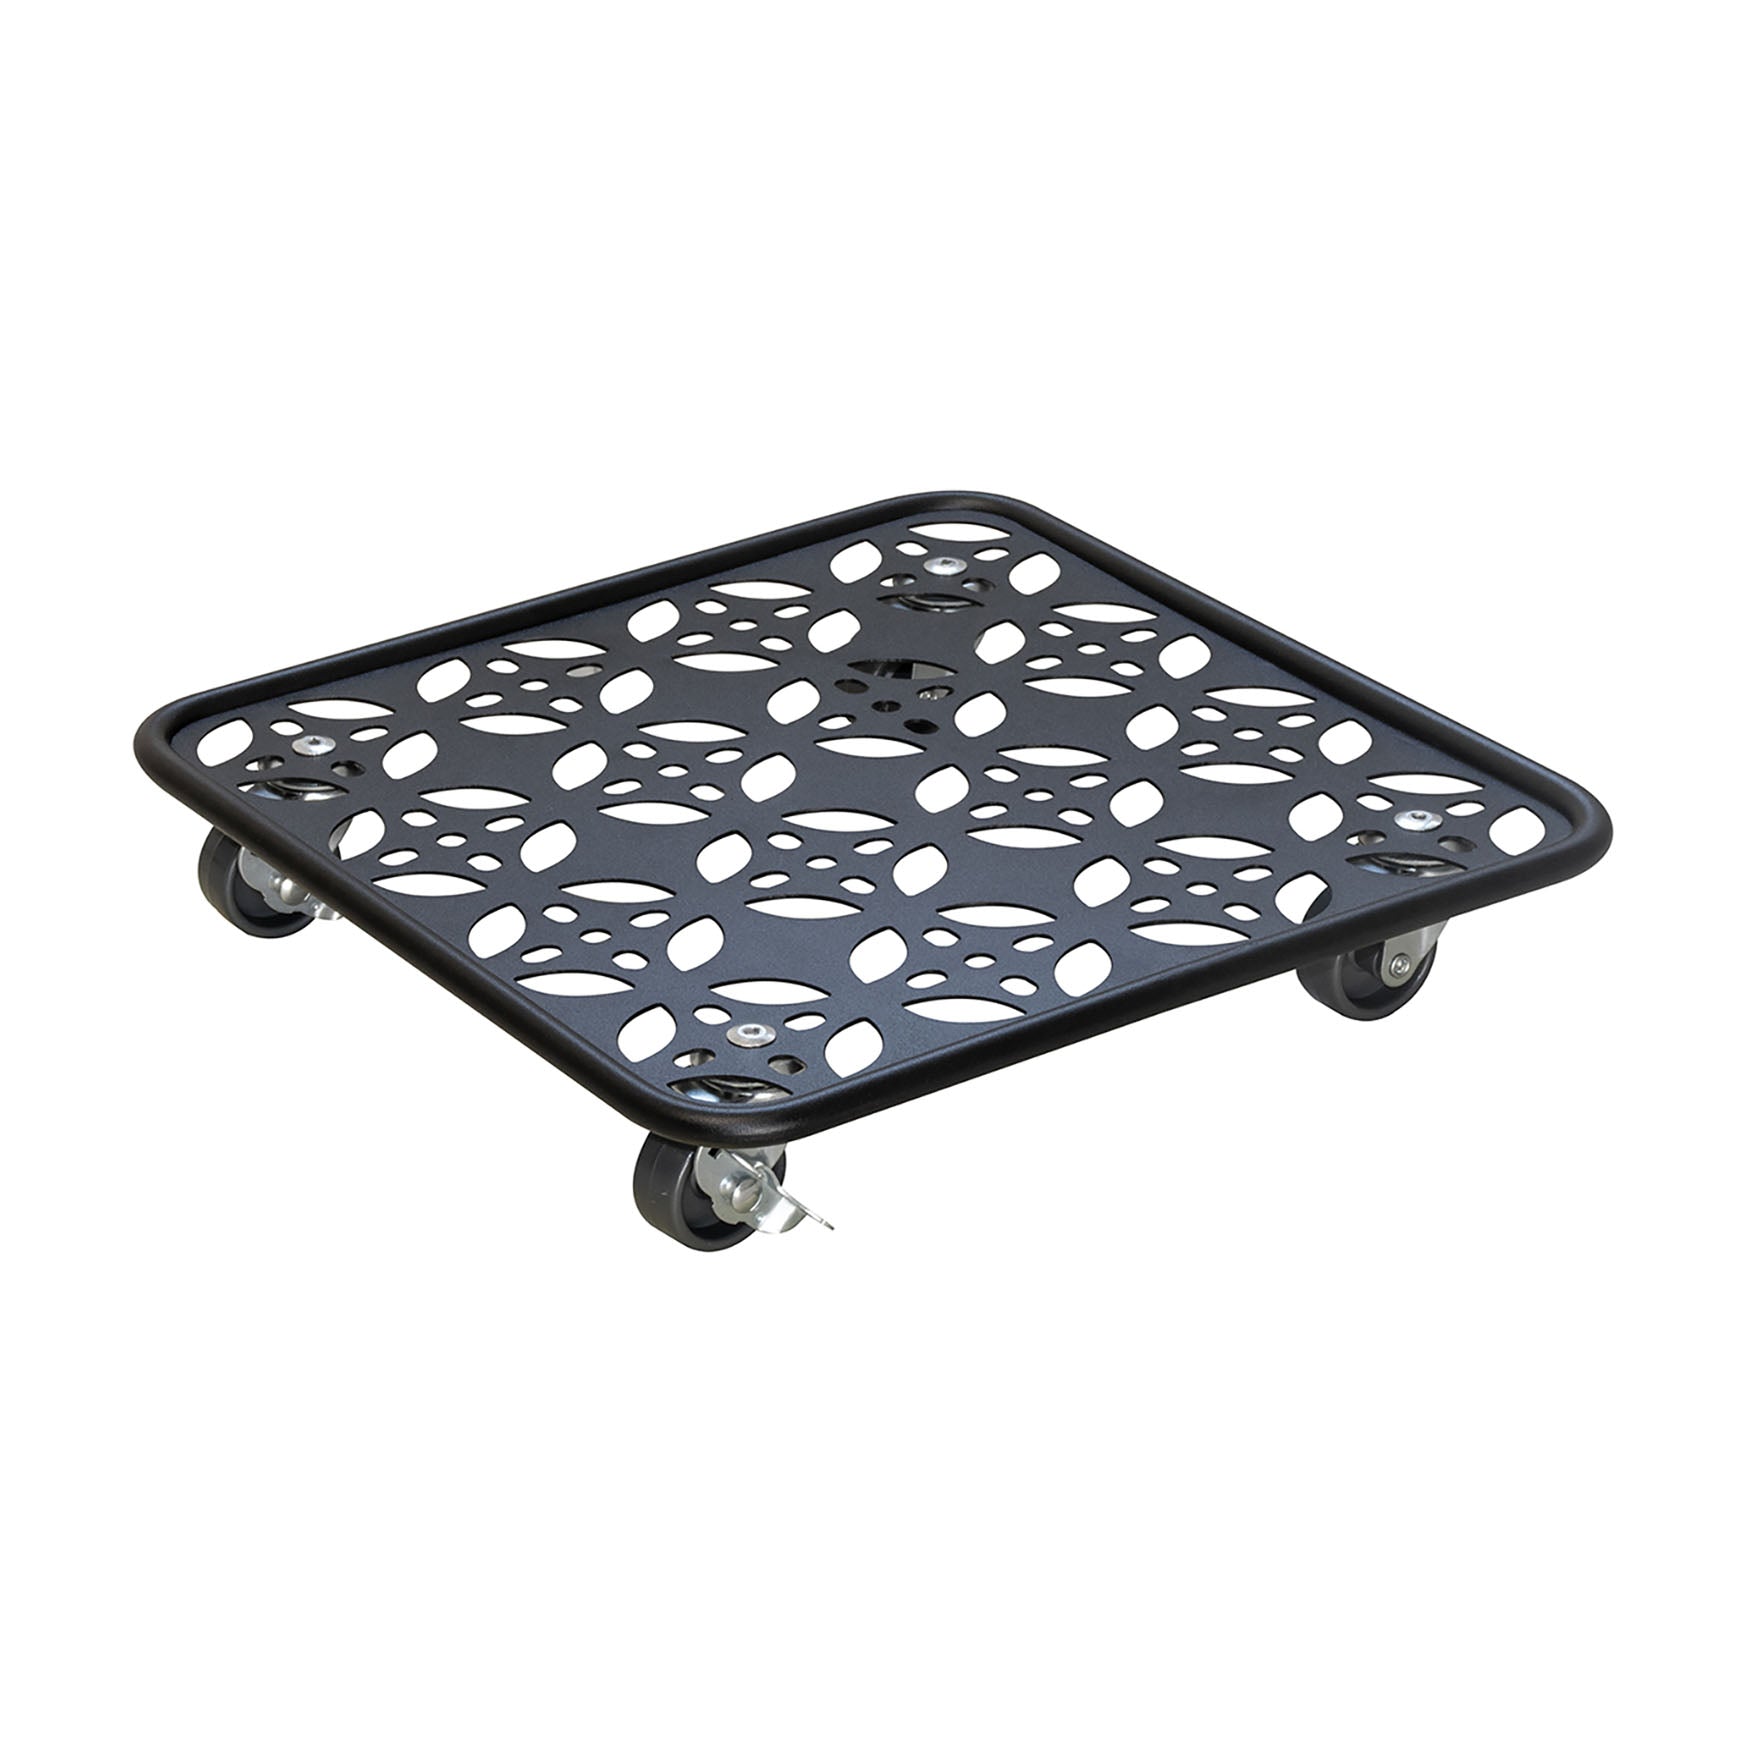 Black Square Flower Steel Plant Caddy with brakes. Made of cast iron. Water resistant. 176 lbs capacity. 11.8"W x 11.8"D x 2.25"H, 2.1 lbs.